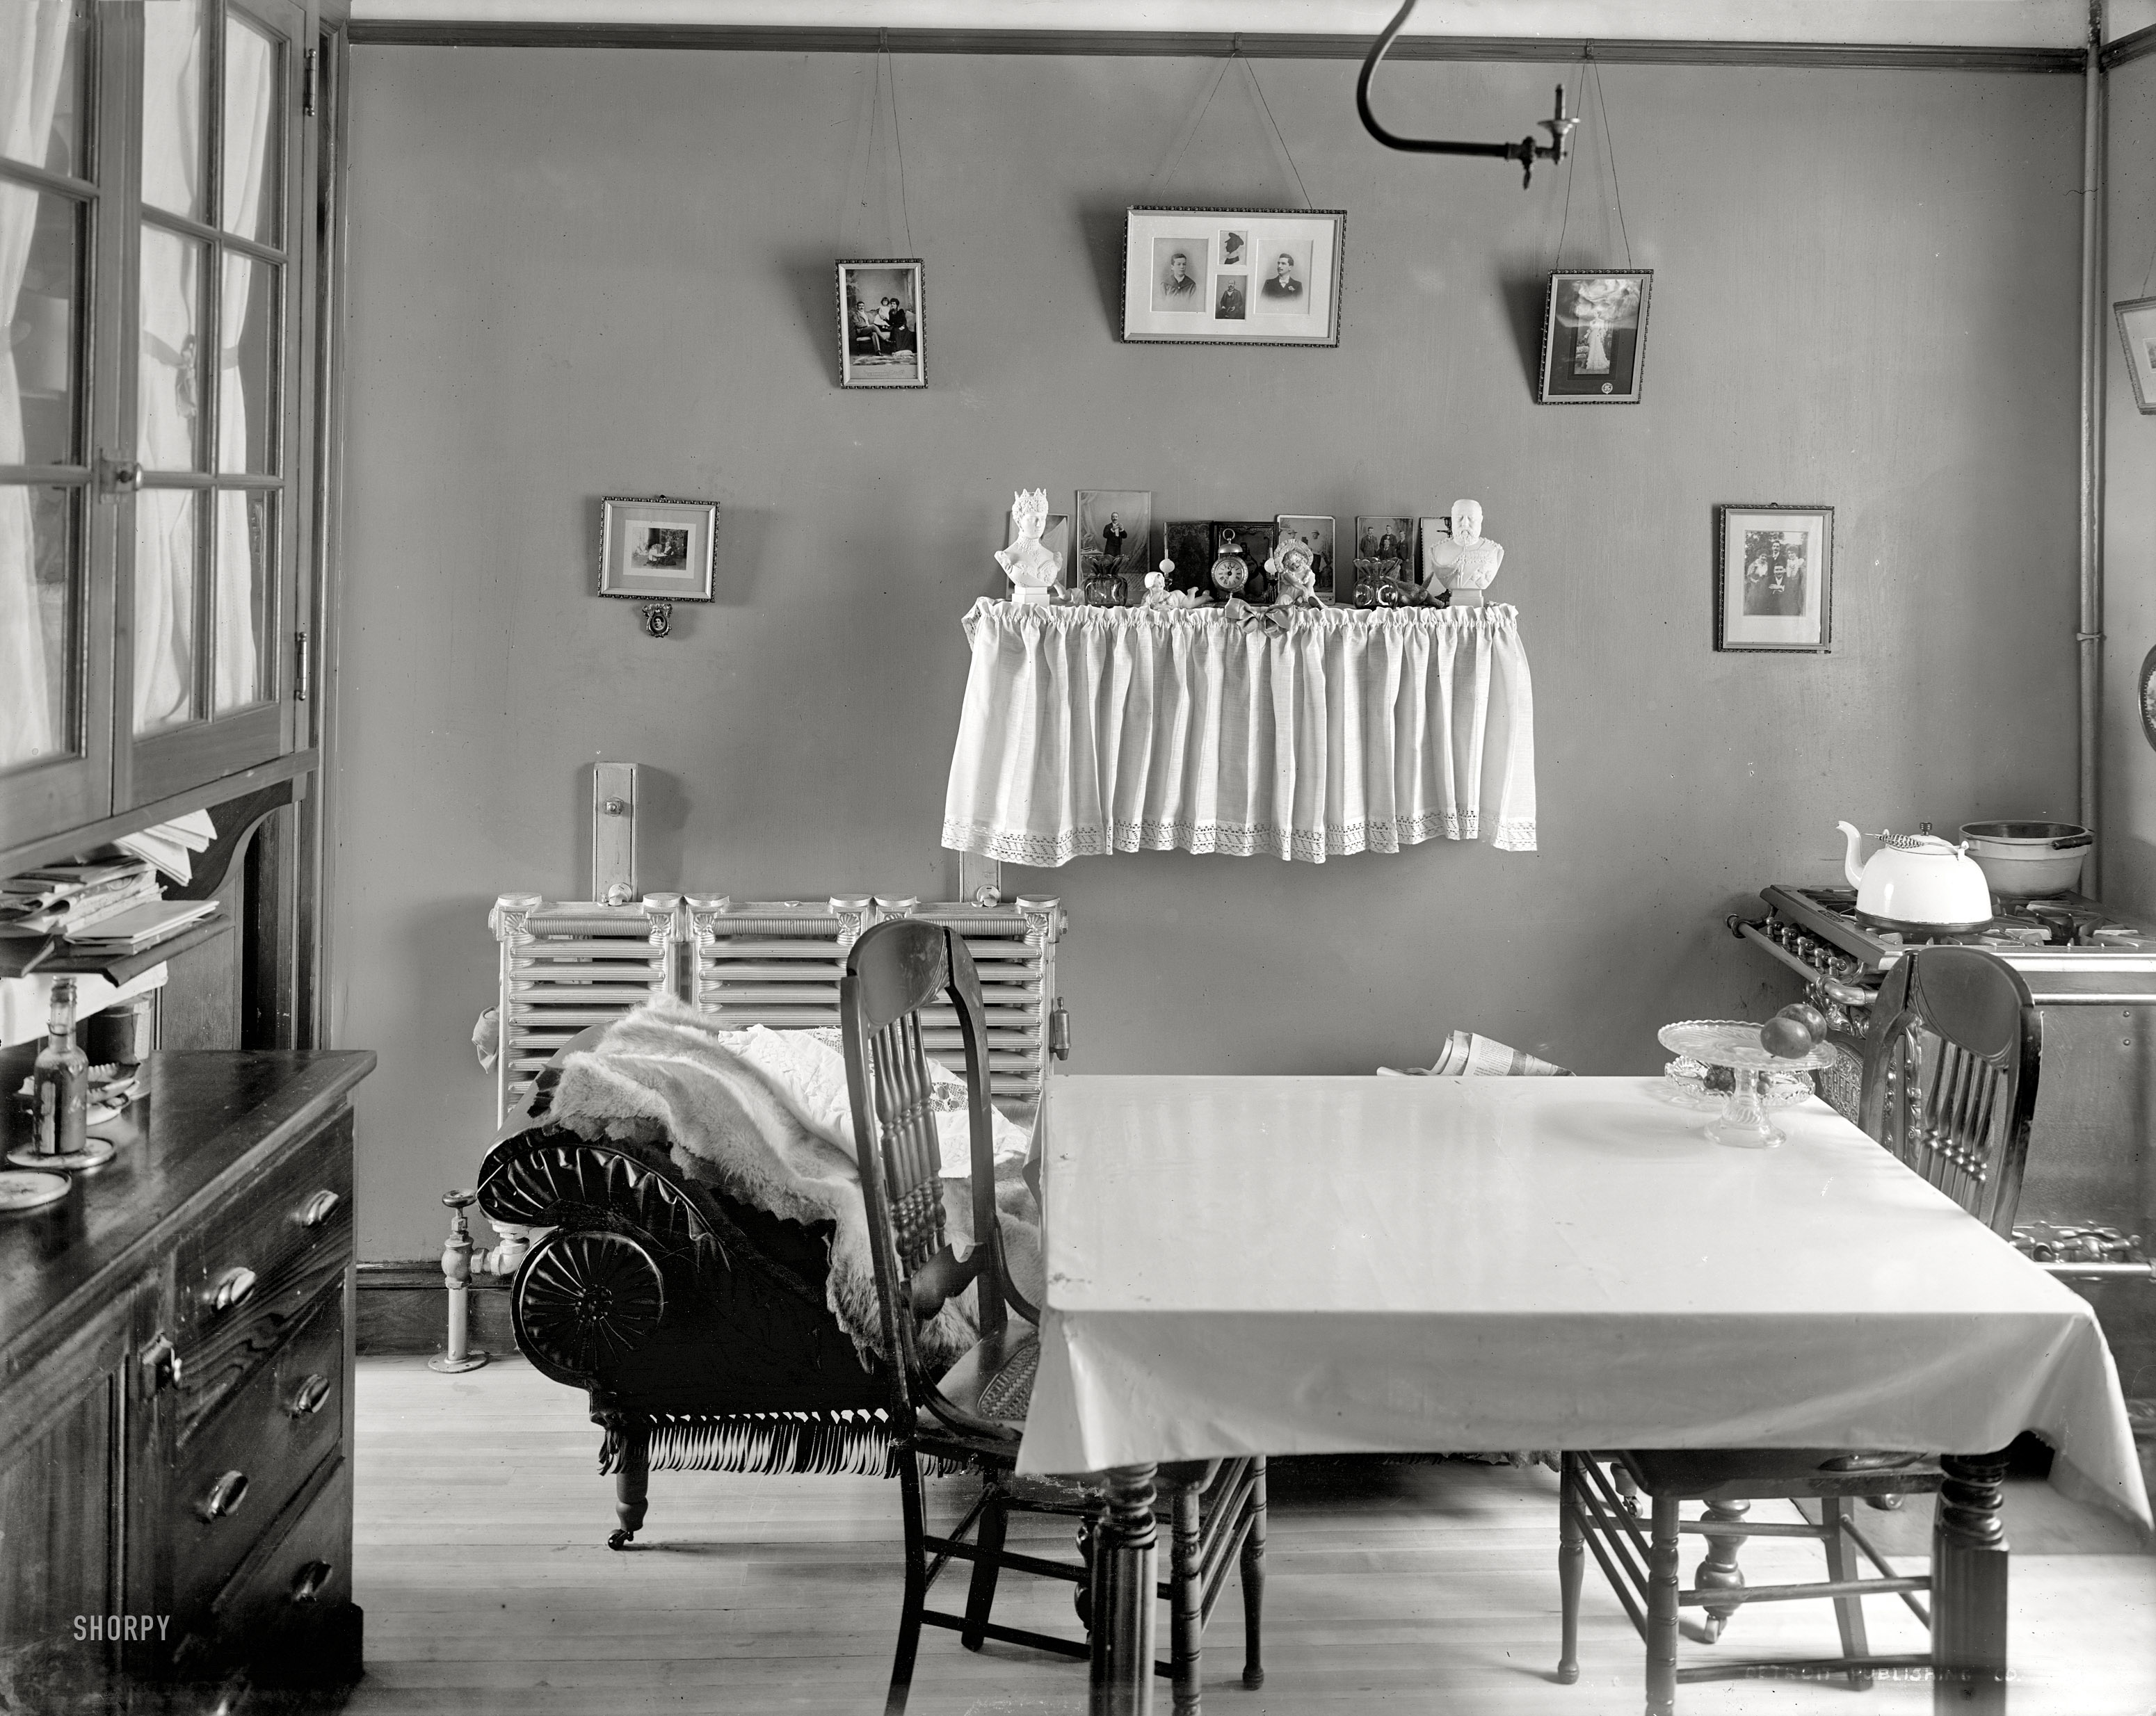 New York circa 1905. "Interior of tenement." All the conveniences, including a somewhat incongruous couch on wheels.  8x10 glass negative. View full size.